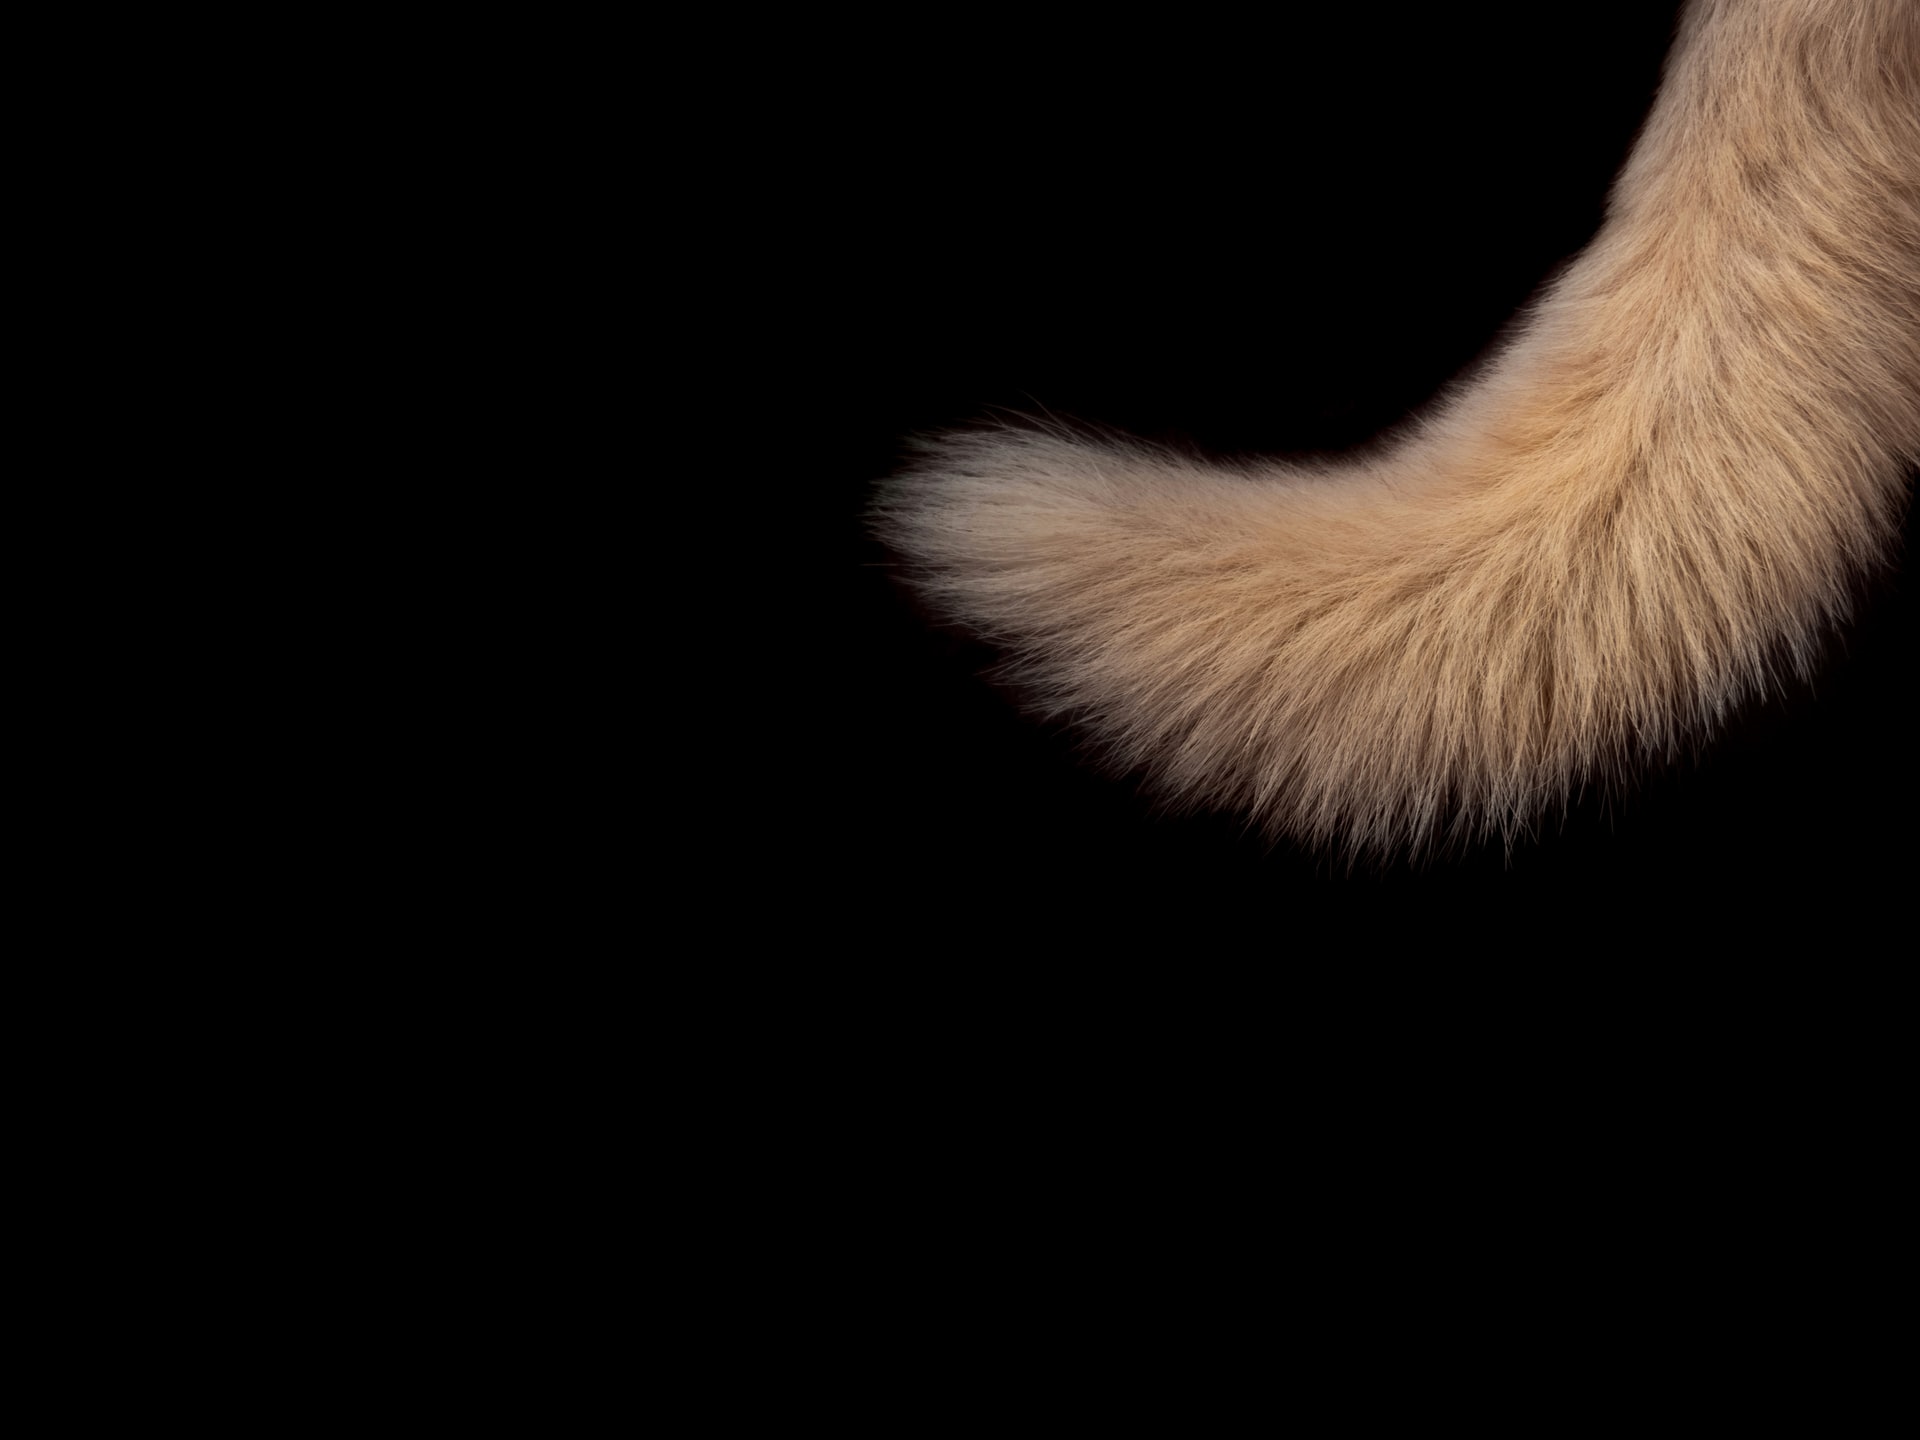 Yellow dog tail against a black background.